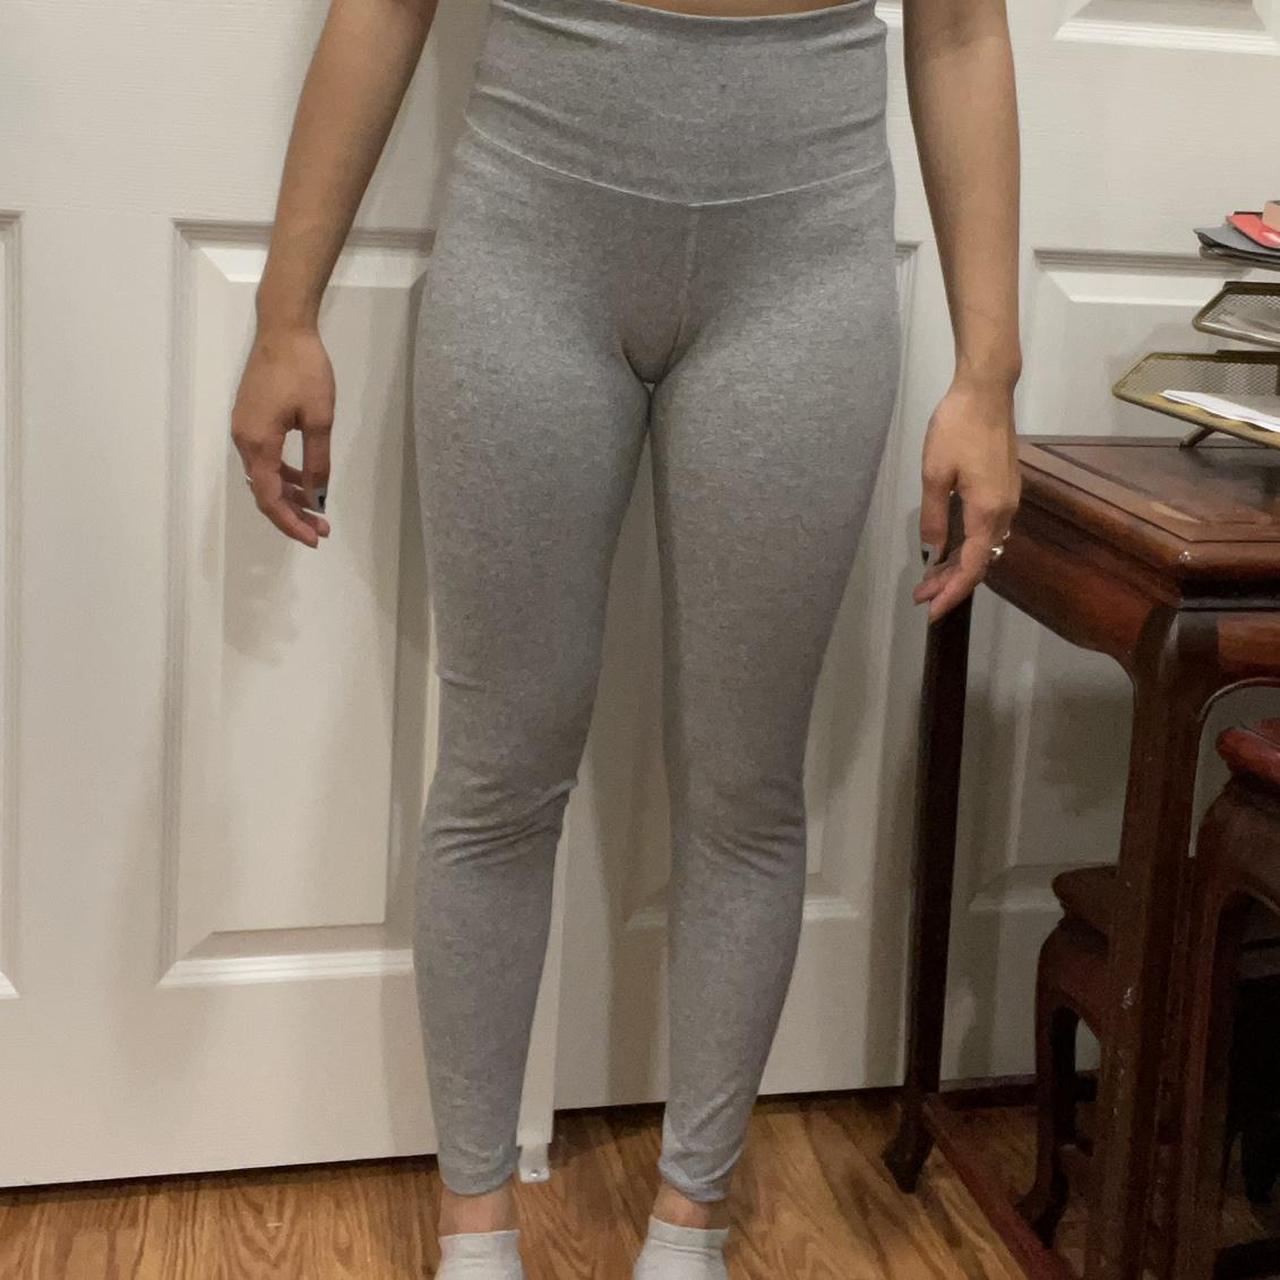 high waisted simple gray leggings work out - Depop